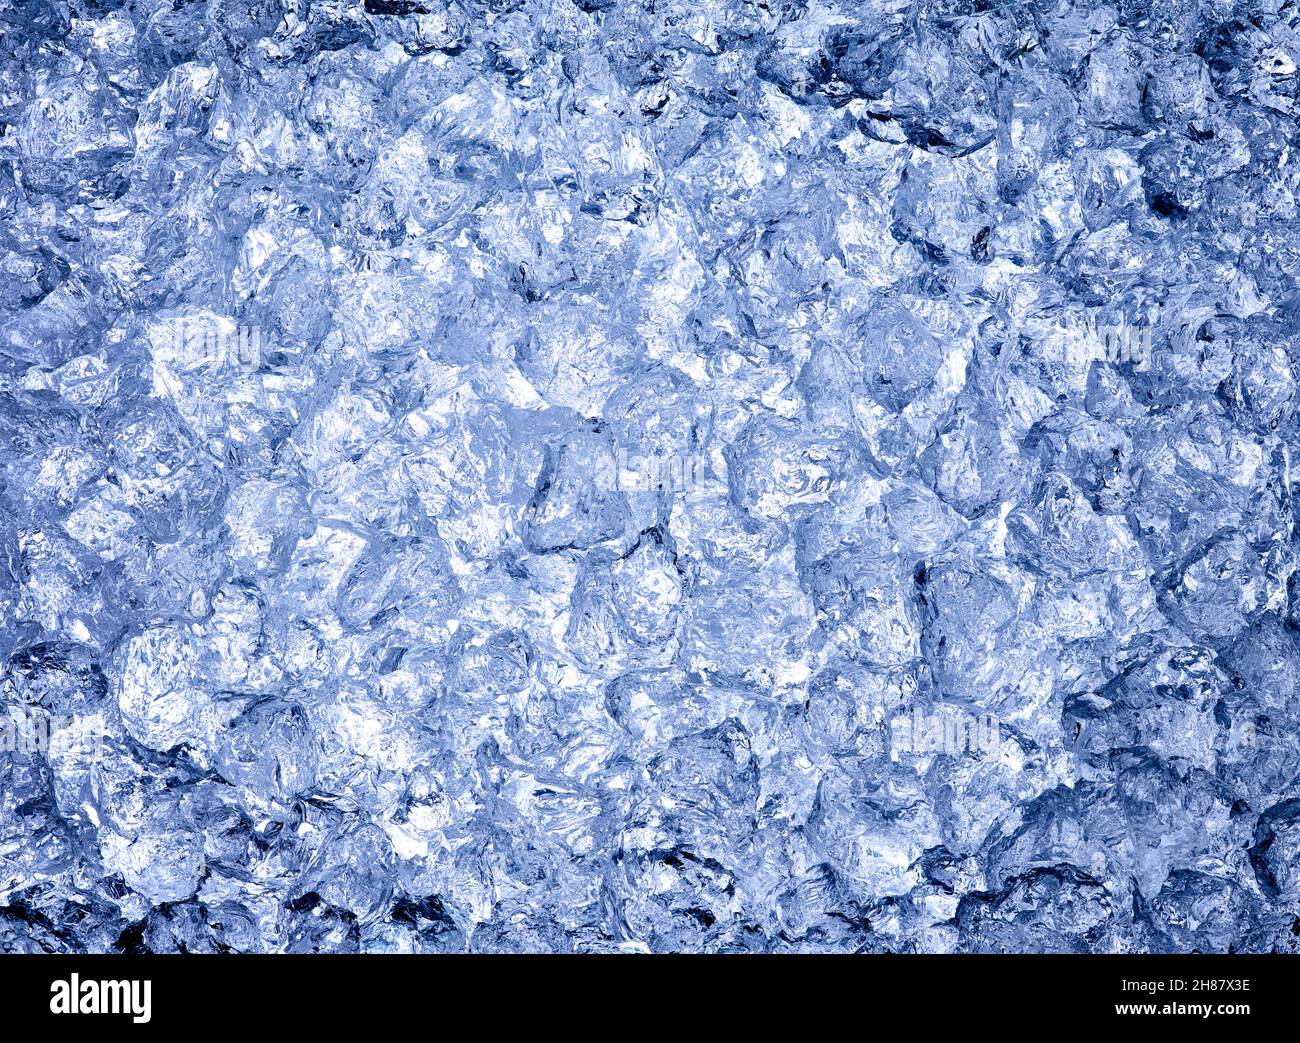 Heap of crushed ice isolated on white background with copy space